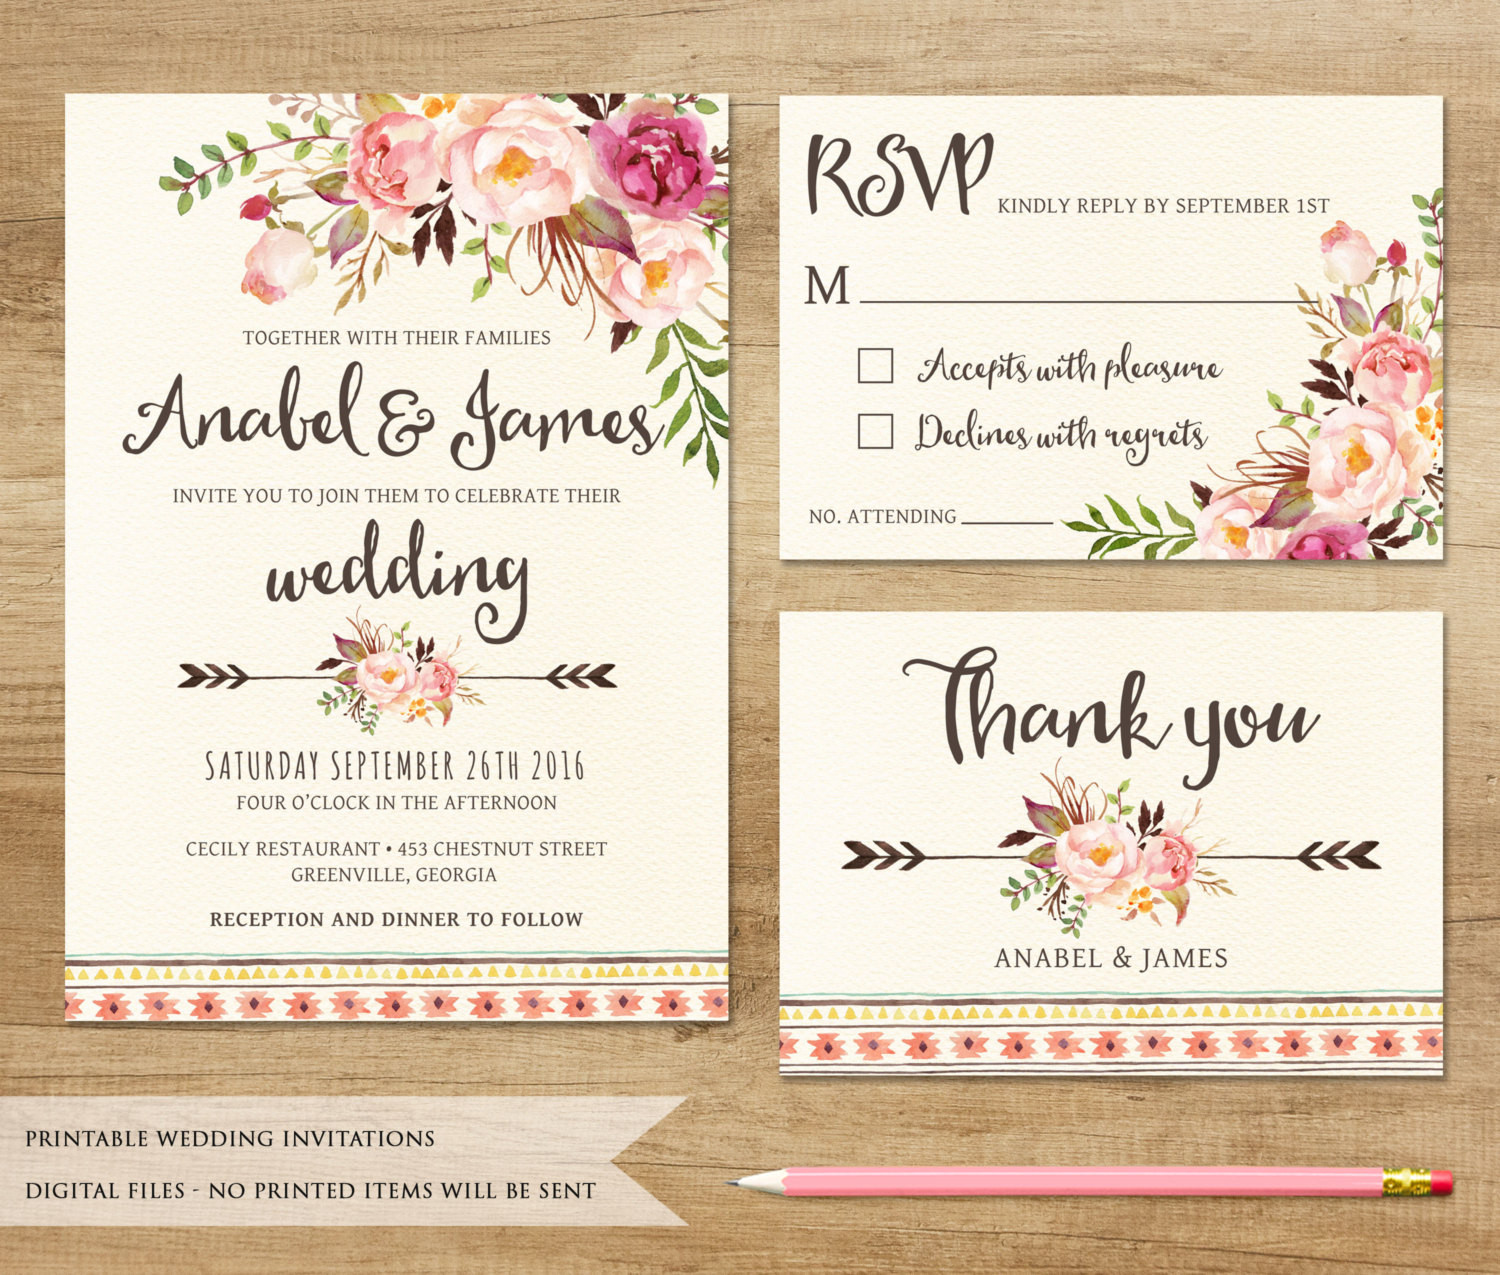 Downloadable Wedding Invitations
 Floral Wedding Invitation Printable Wedding Invitation